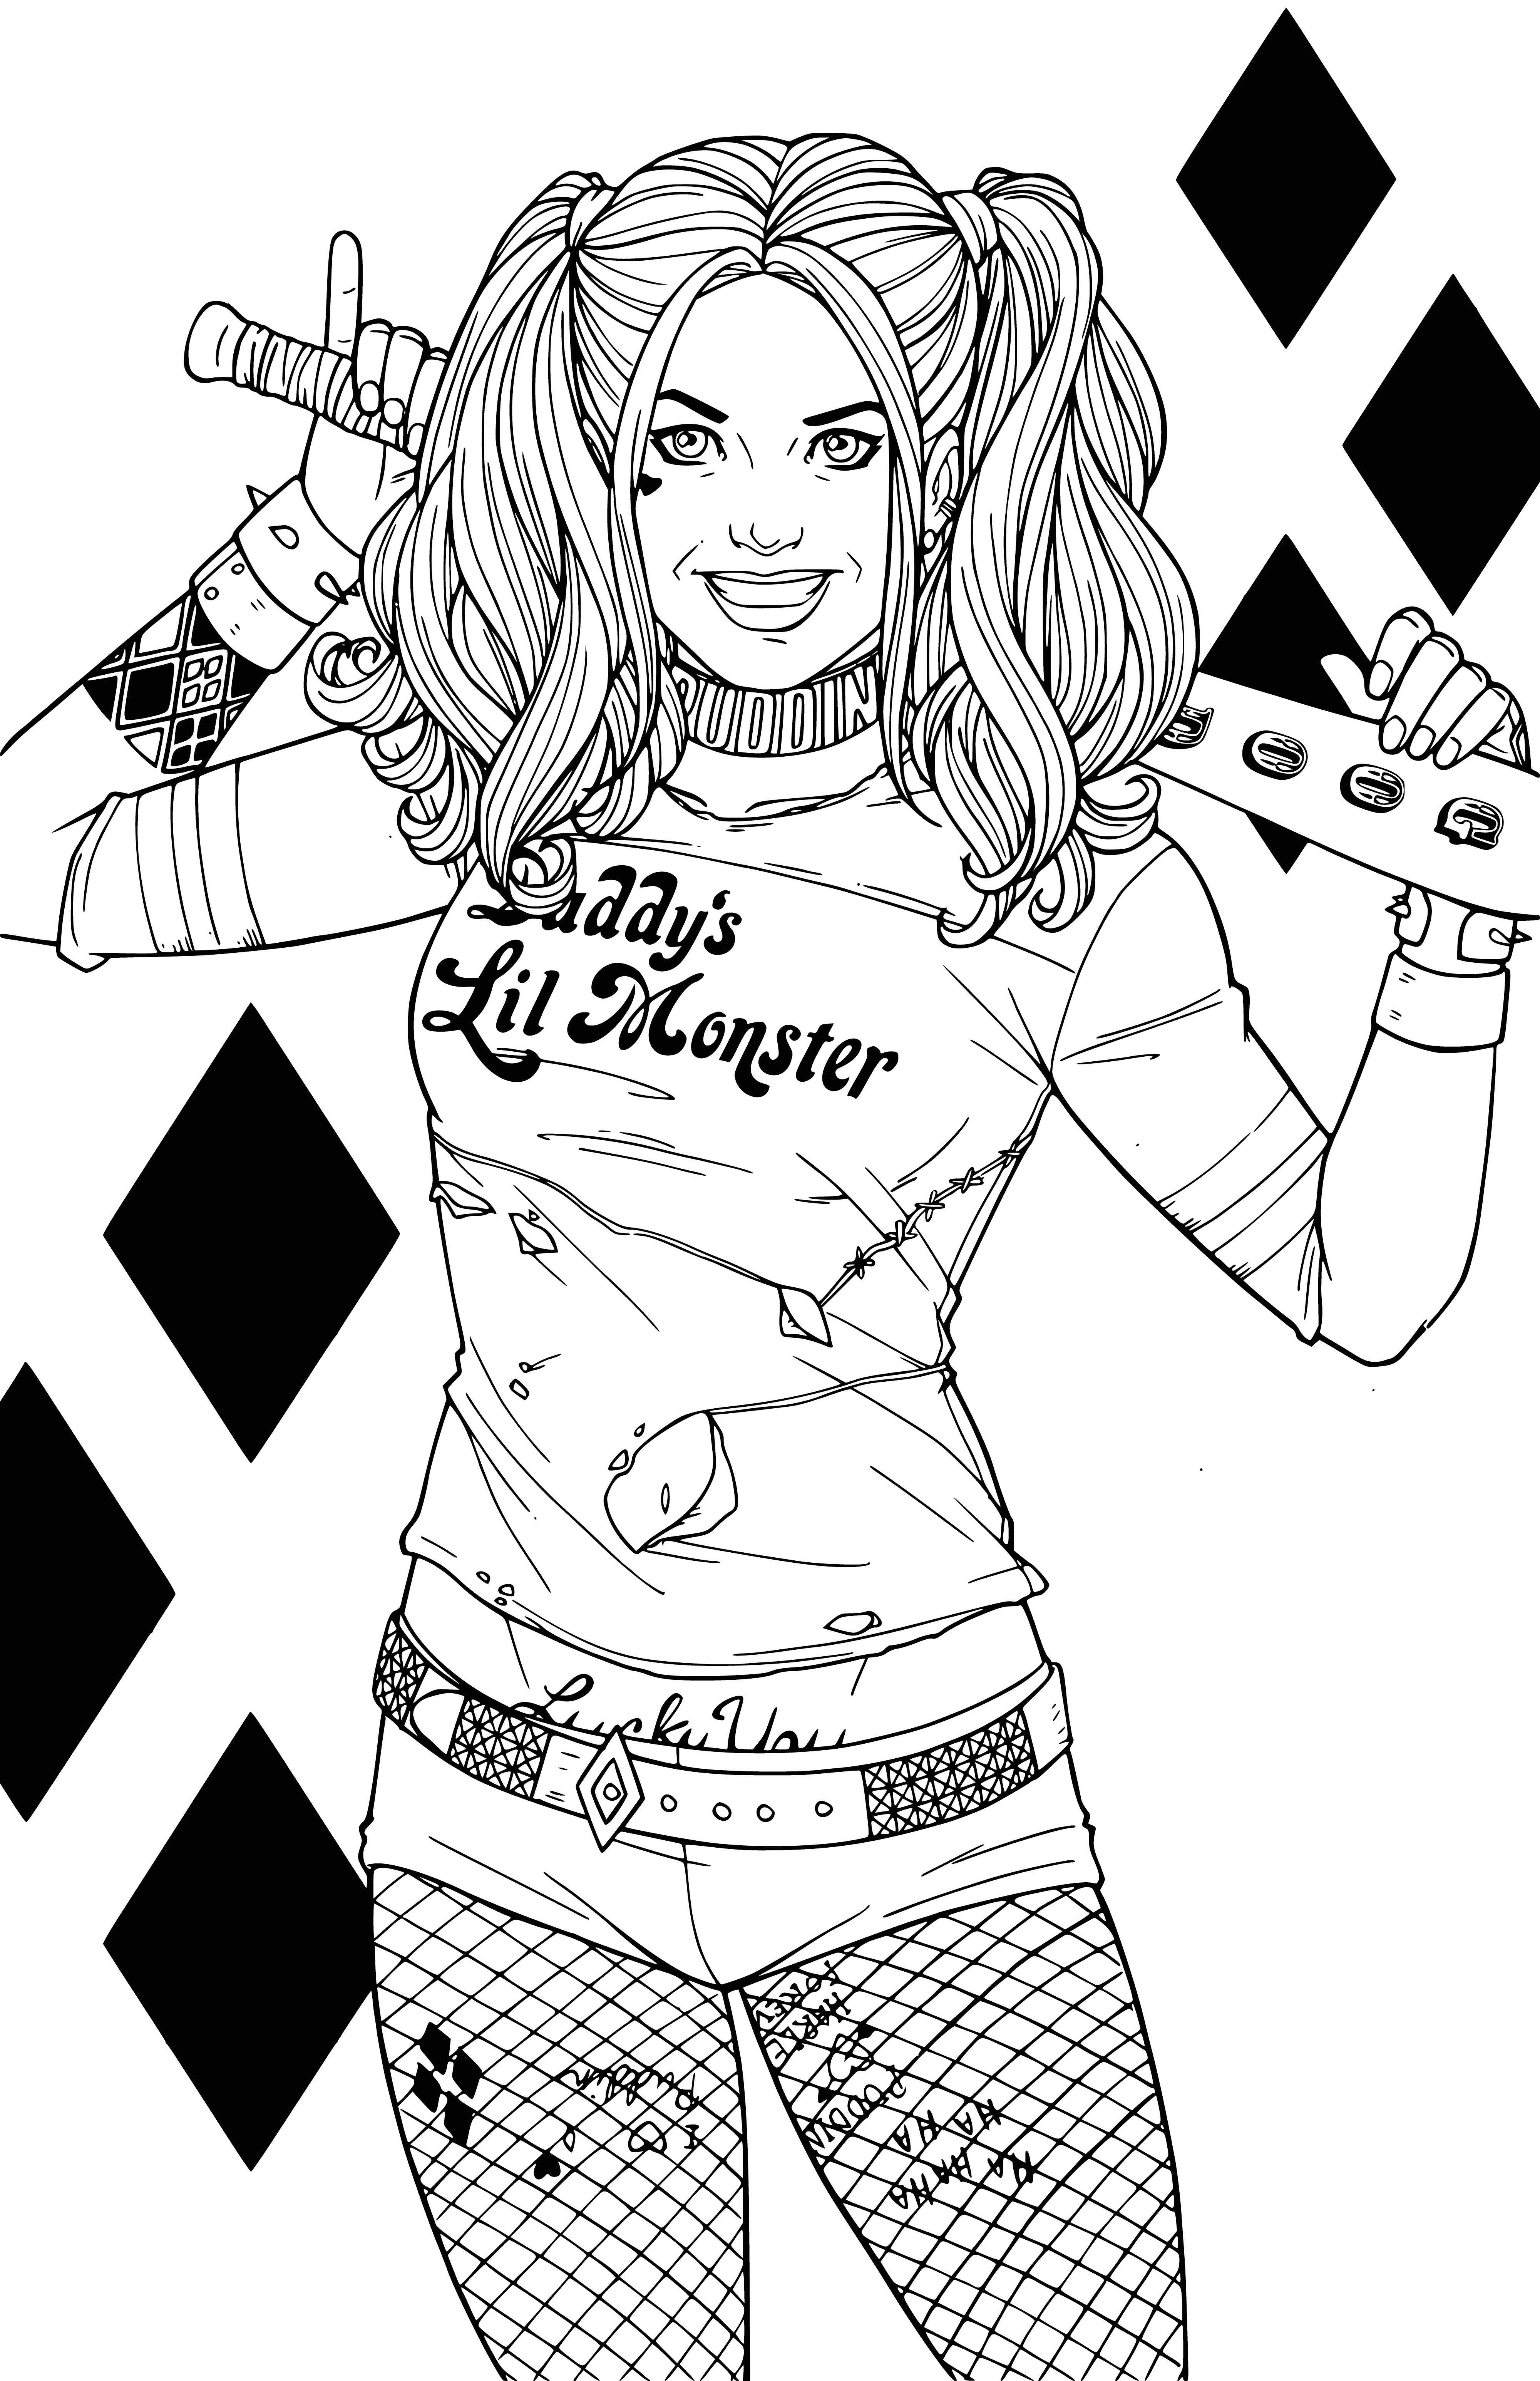 coloring page: Harley Quinn is a DC supervillain, associated with the Joker but also able to team up with other villains. She is known for her brutal fighting and unstable personality, making her a feared opponent.